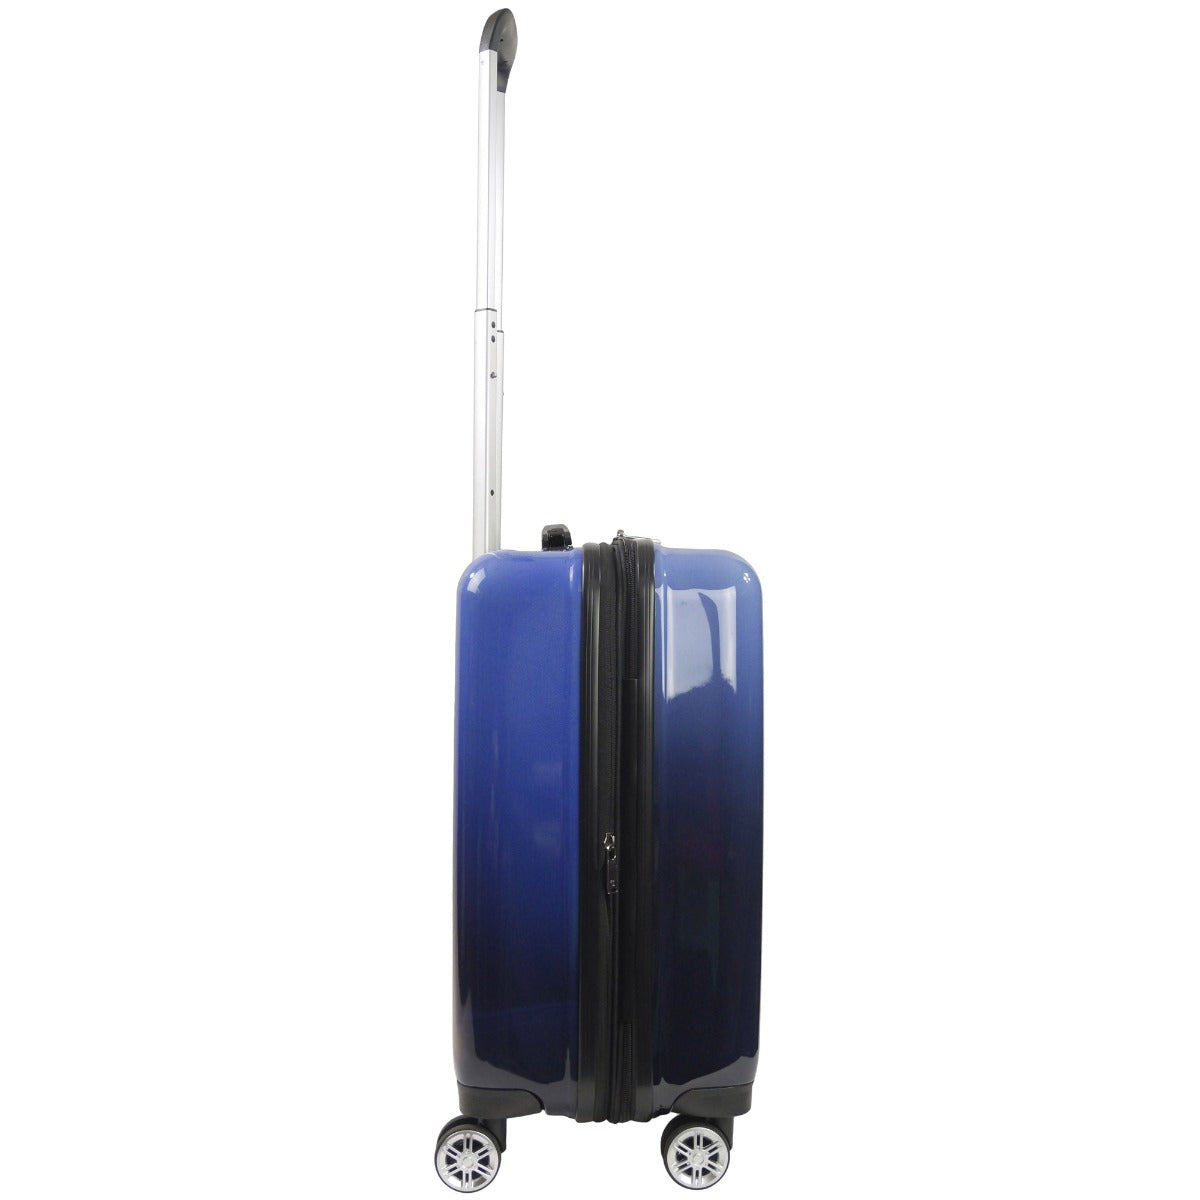 Blue Ful Impulse Ombre 22" carry-on hardshell rolling luggage for traveling